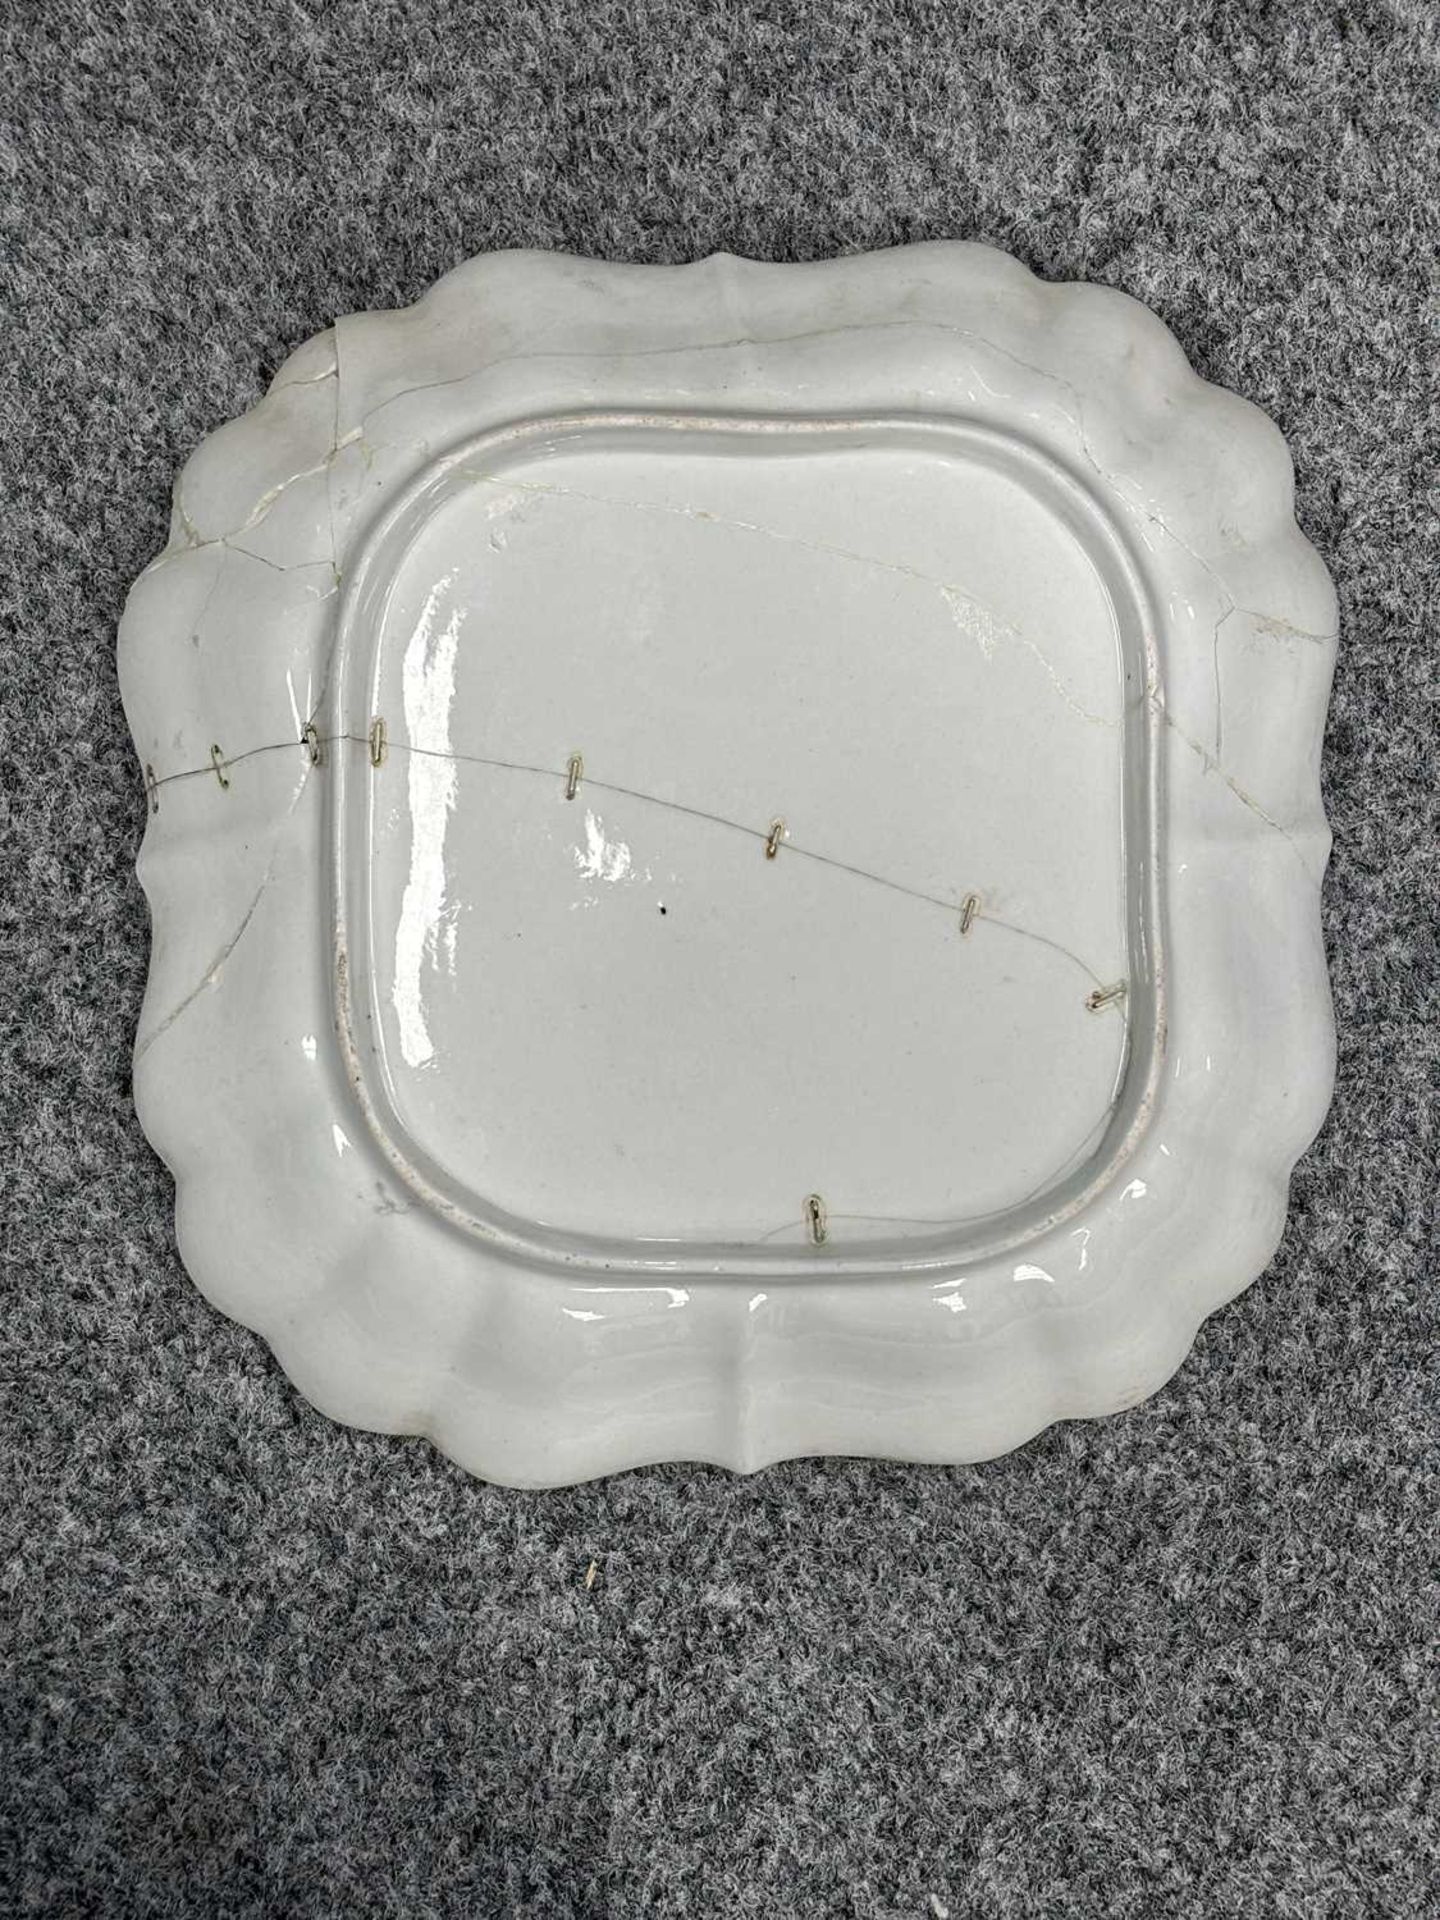 A 19TH CENTURY ENGLISH PARTIAL DESSERT SERVICE IN THE QUEEN CHARLOTTE PATTERN - Image 7 of 7